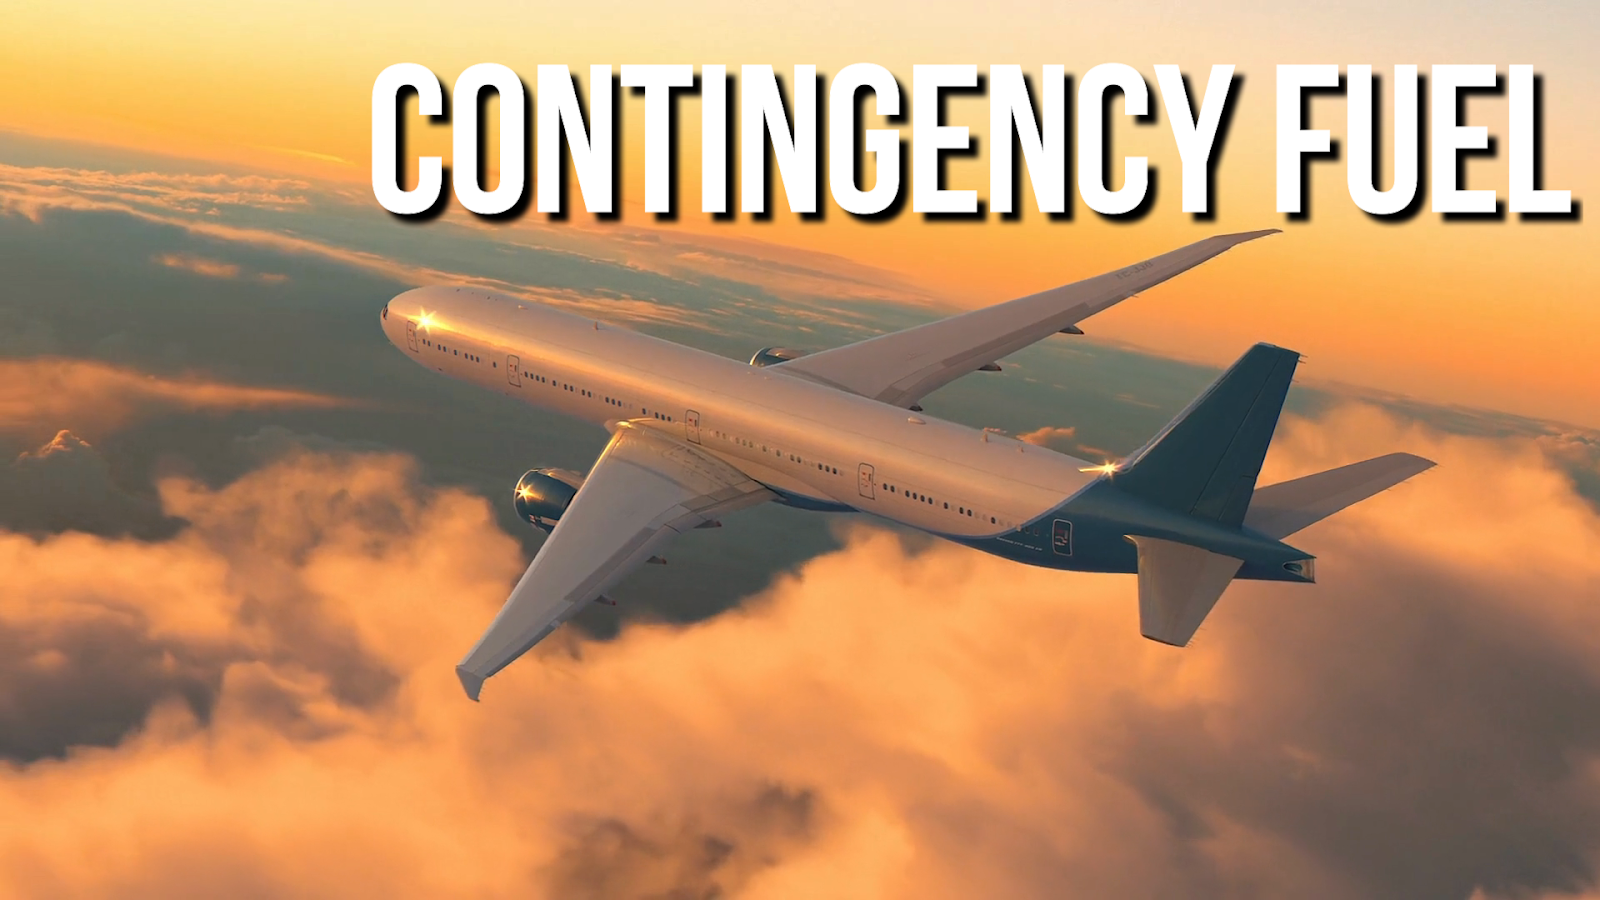 Contingency fuel or food is important to have for unforeseen circumstances when traveling 